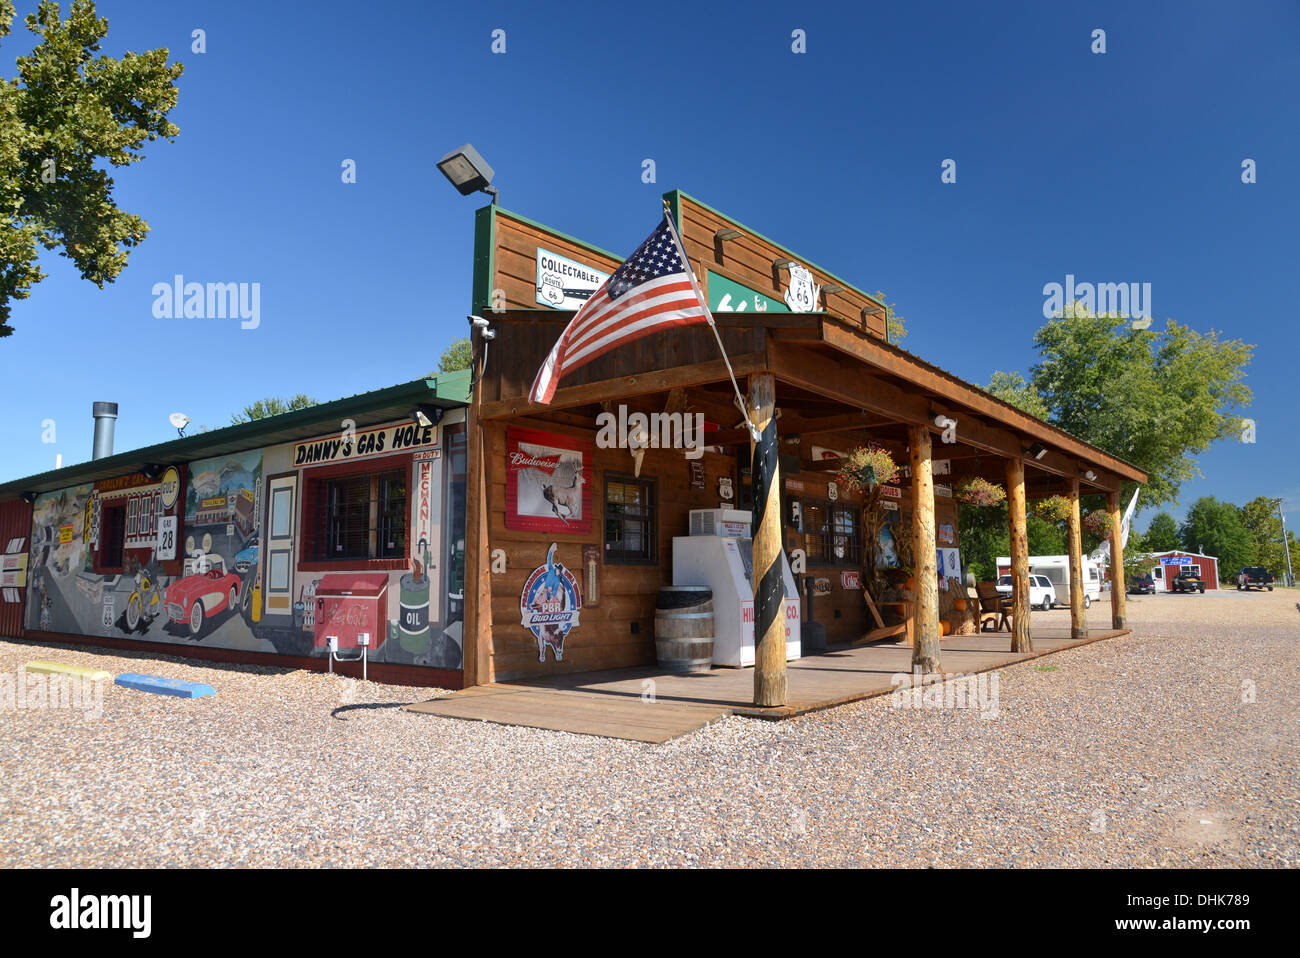 Route 66 Rocker - Worlds Largest Rocking Chair at 66 Outpost store in Fanning, Missouri, a Route 66 giant tourist attraction Stock Photo